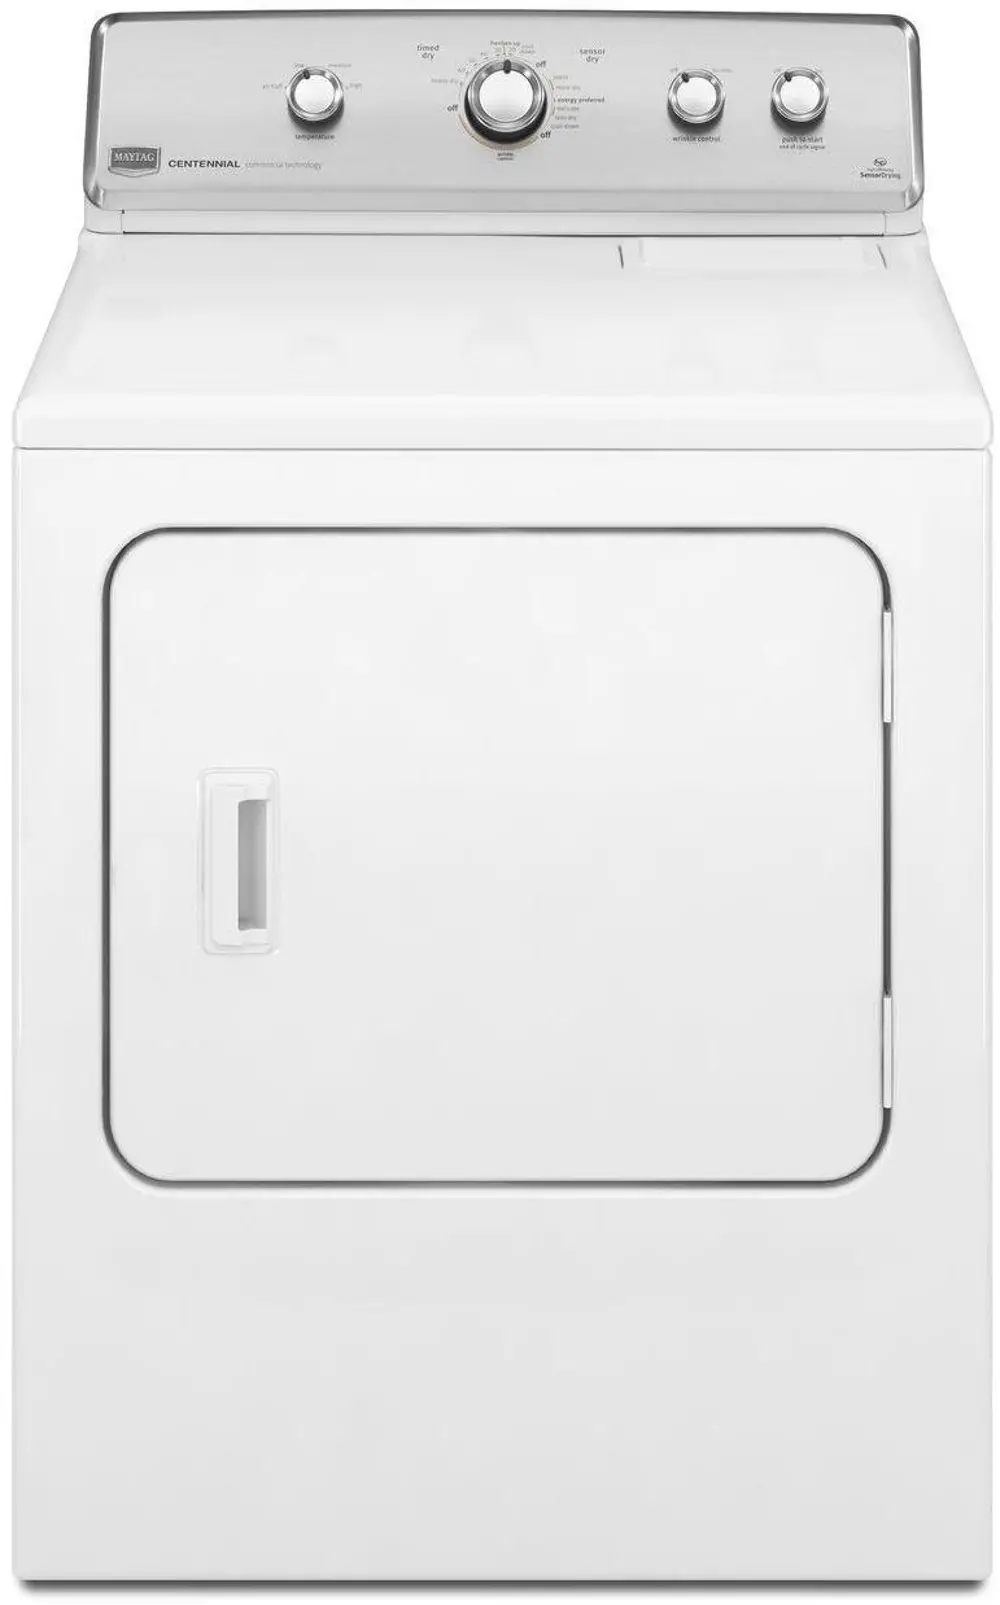 MEDC400BW Maytag 7.0 cu. ft. HE Dryer with IntelliDry Sensor-1